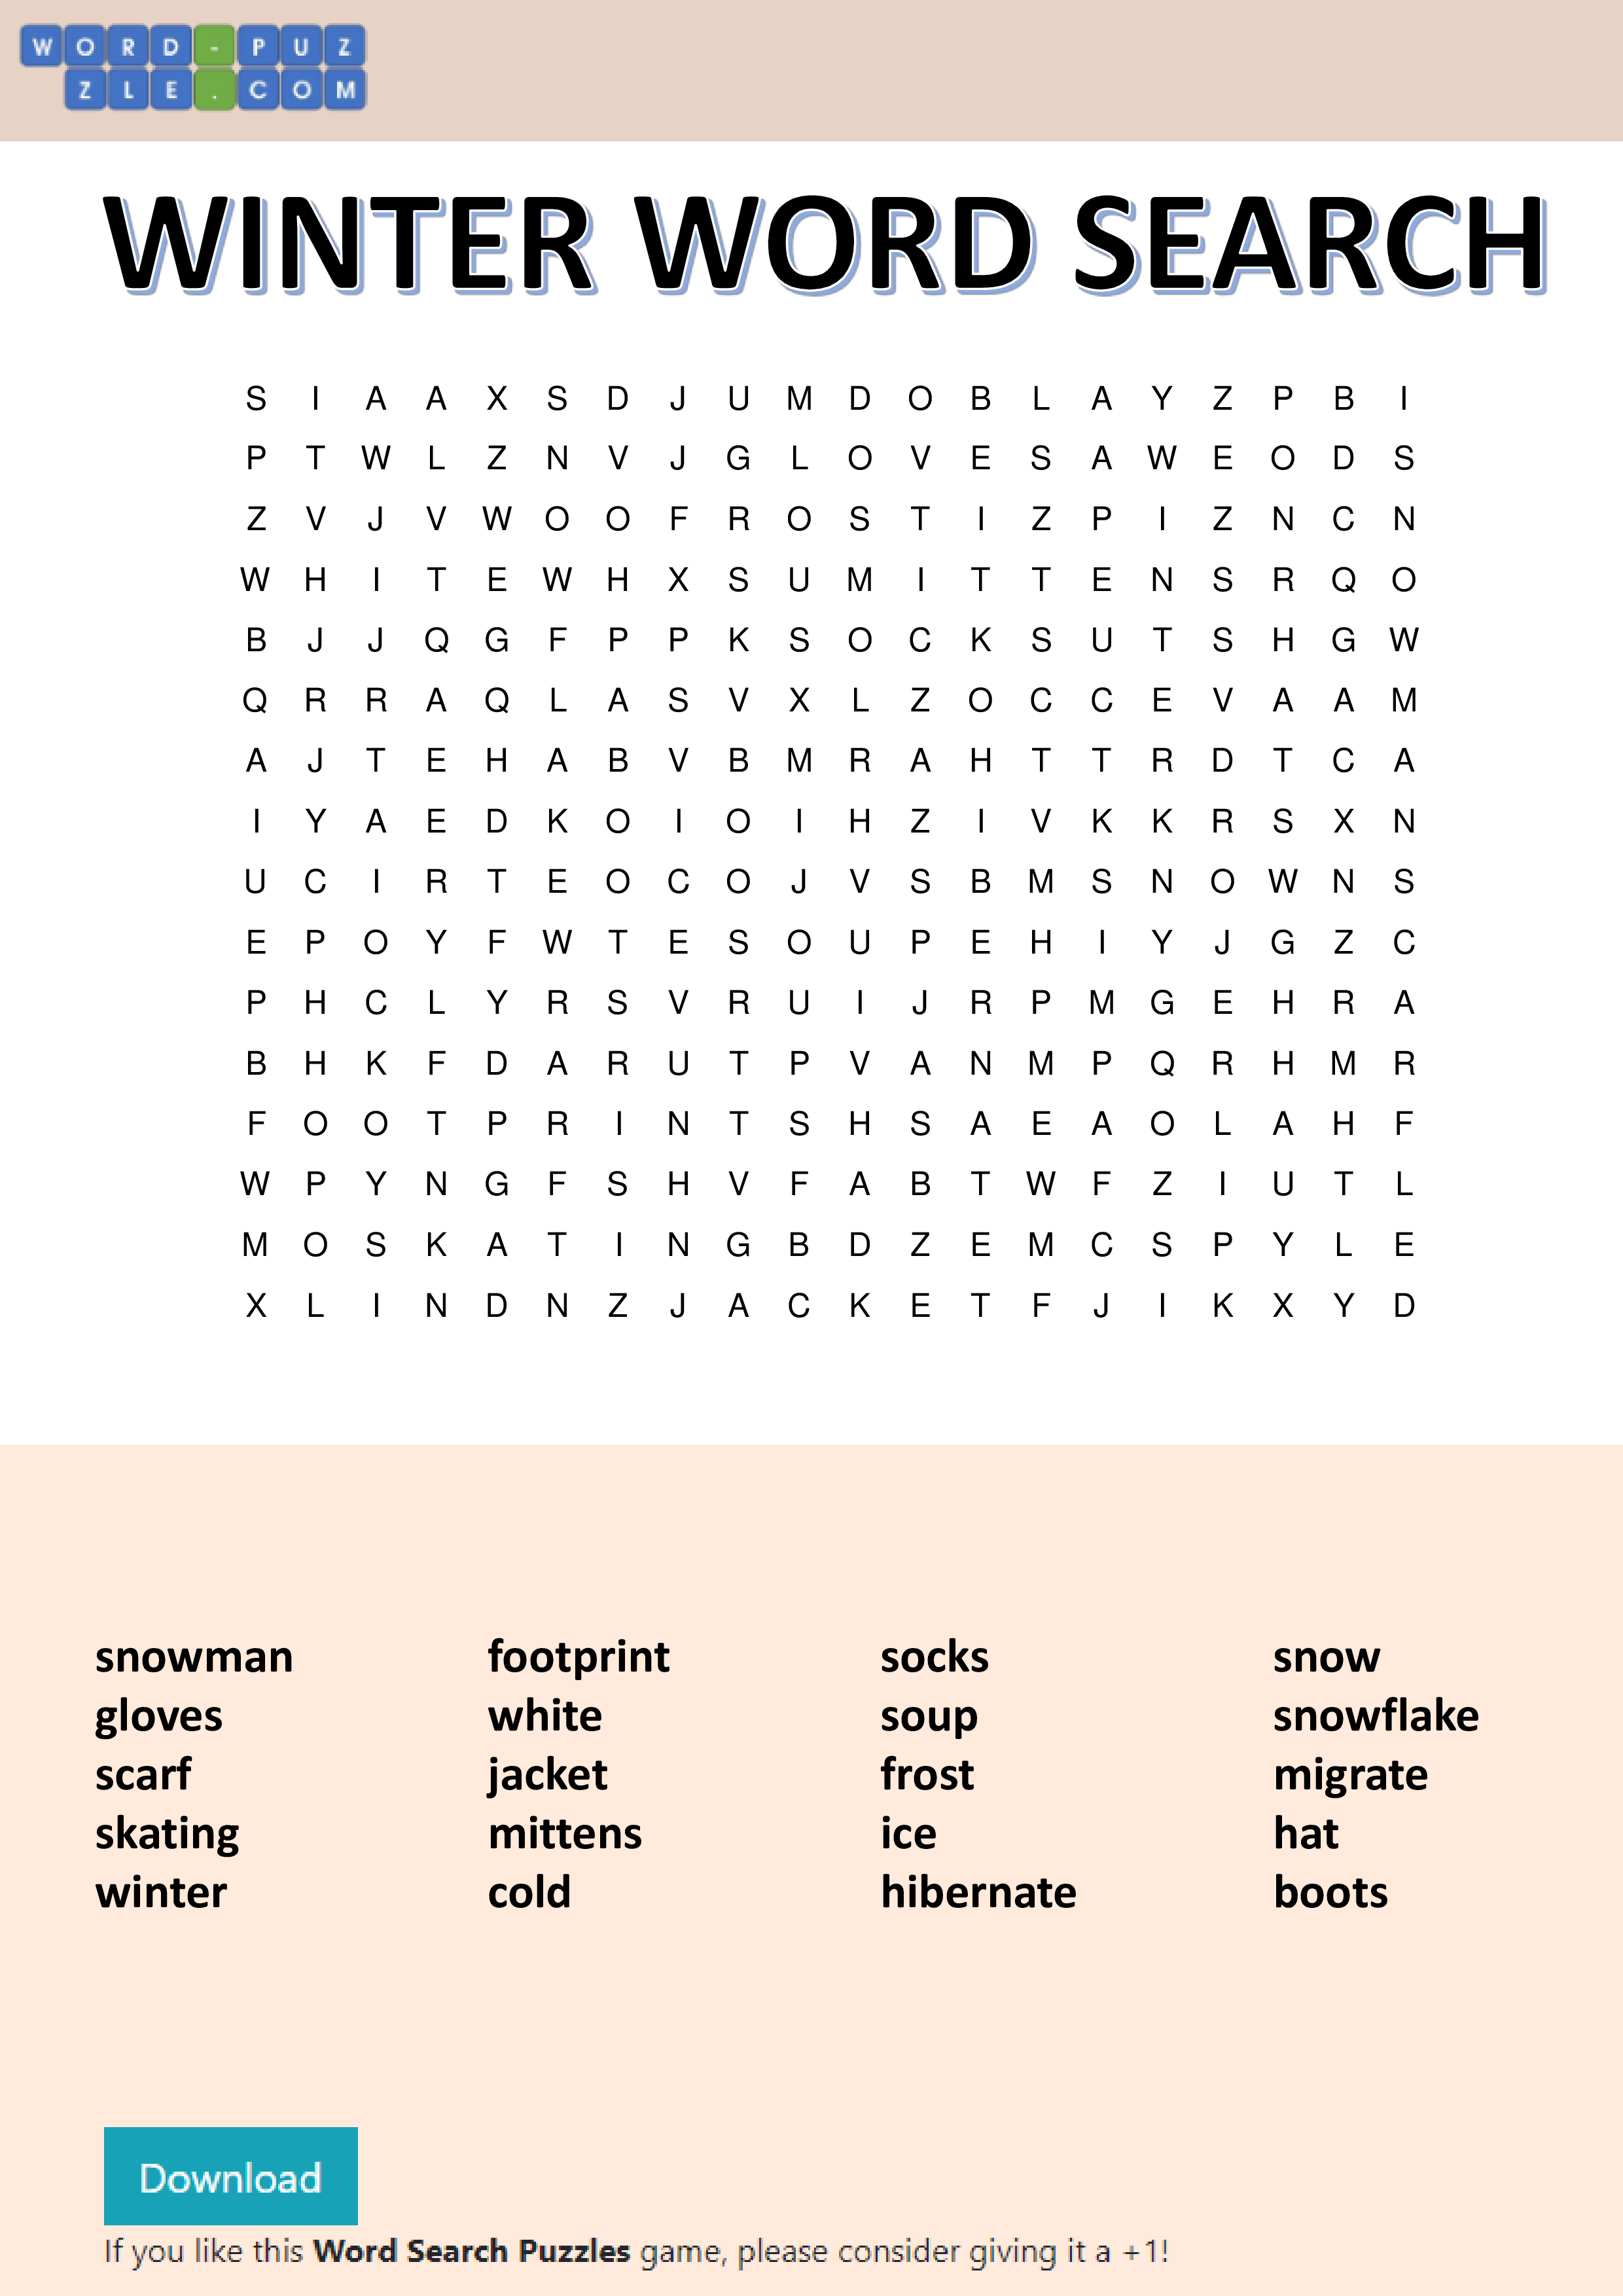 Winter Word Search main image